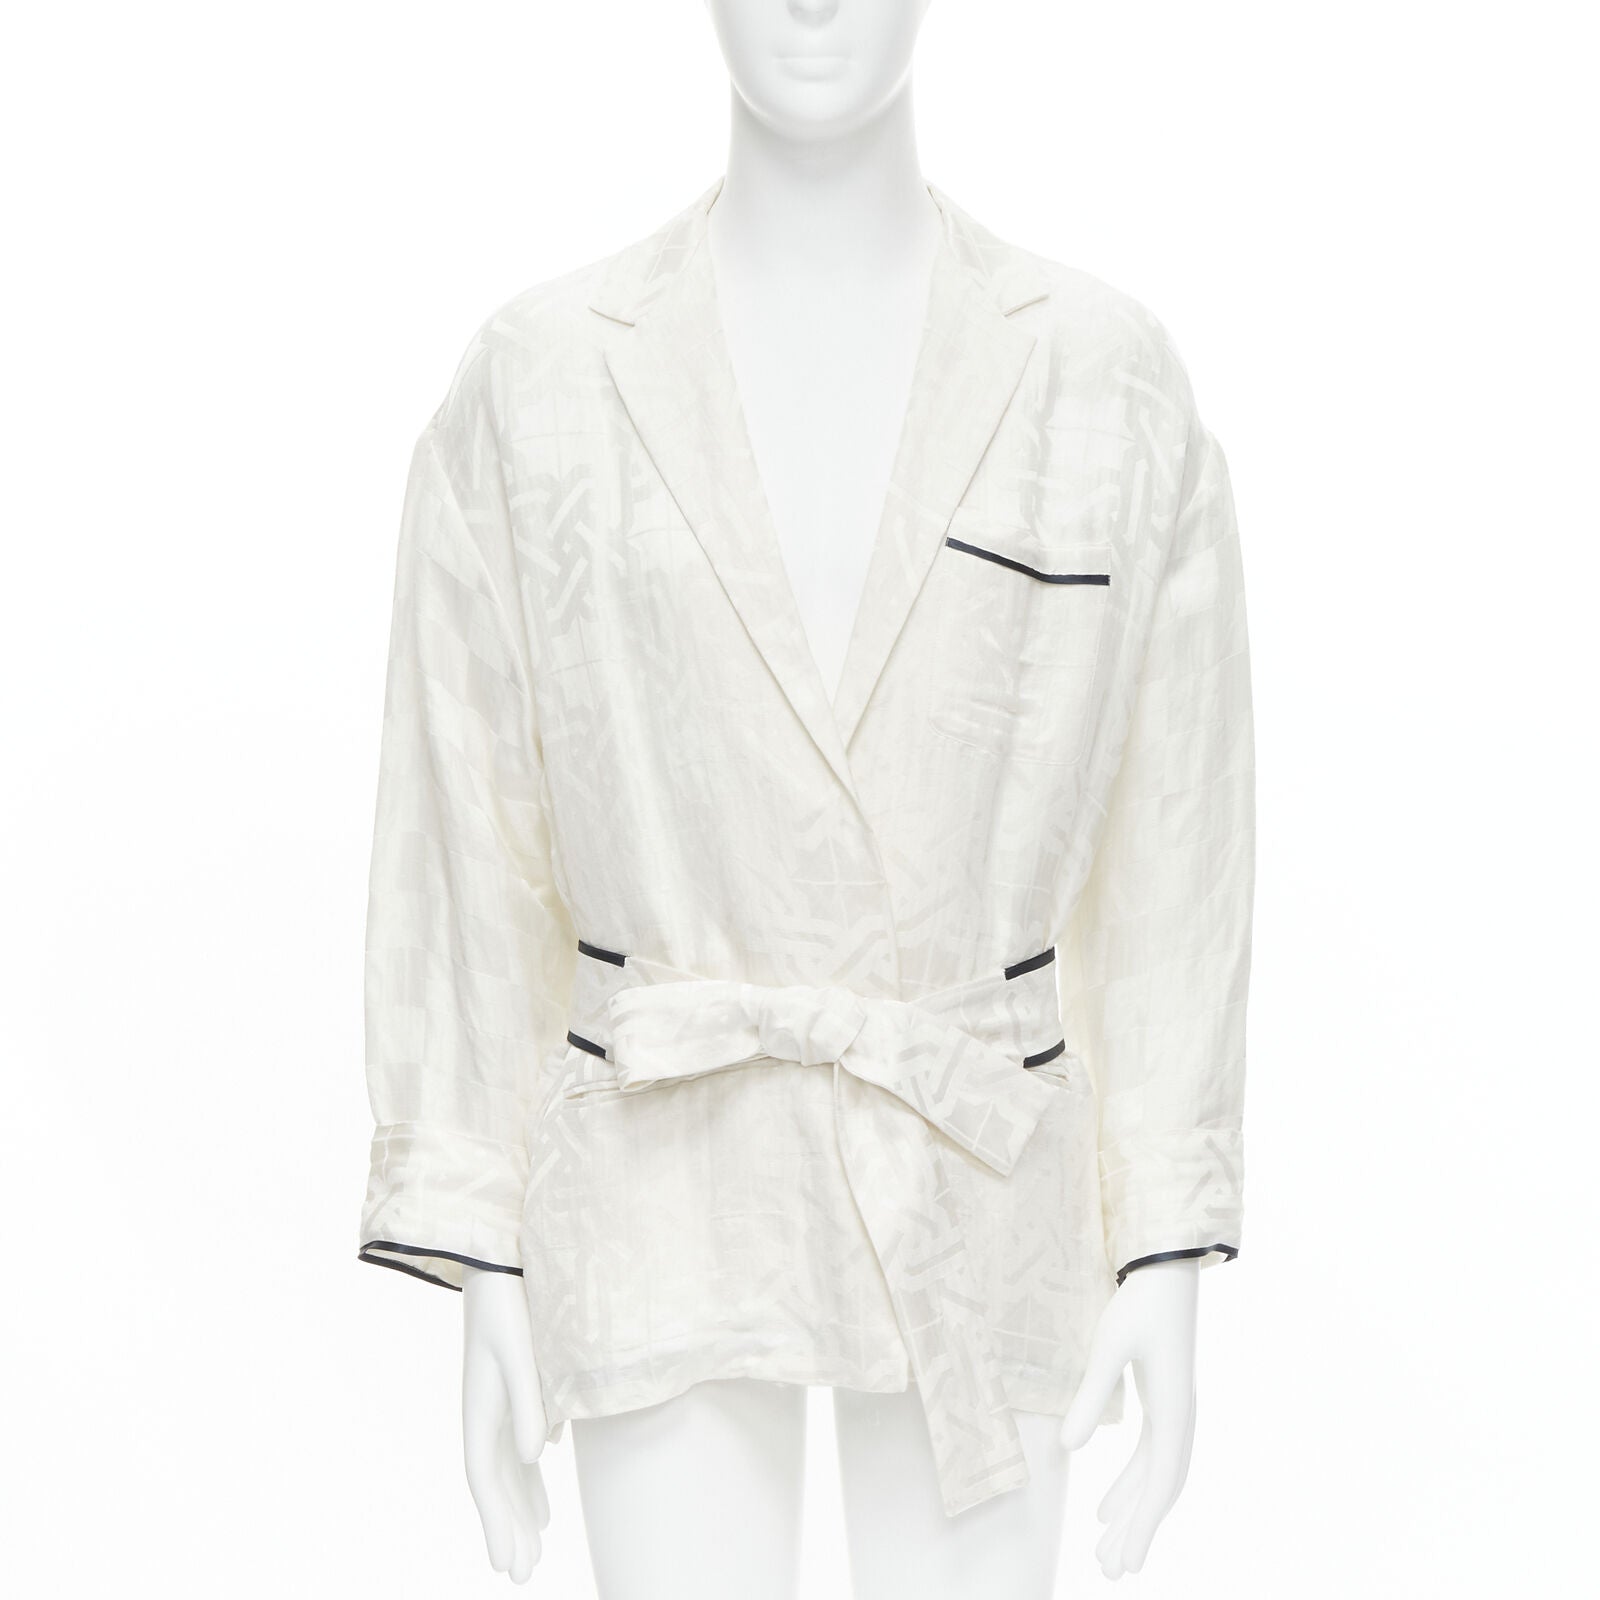 Authentic Guaranteed Haider Ackermann White Top on Sale at JHROP